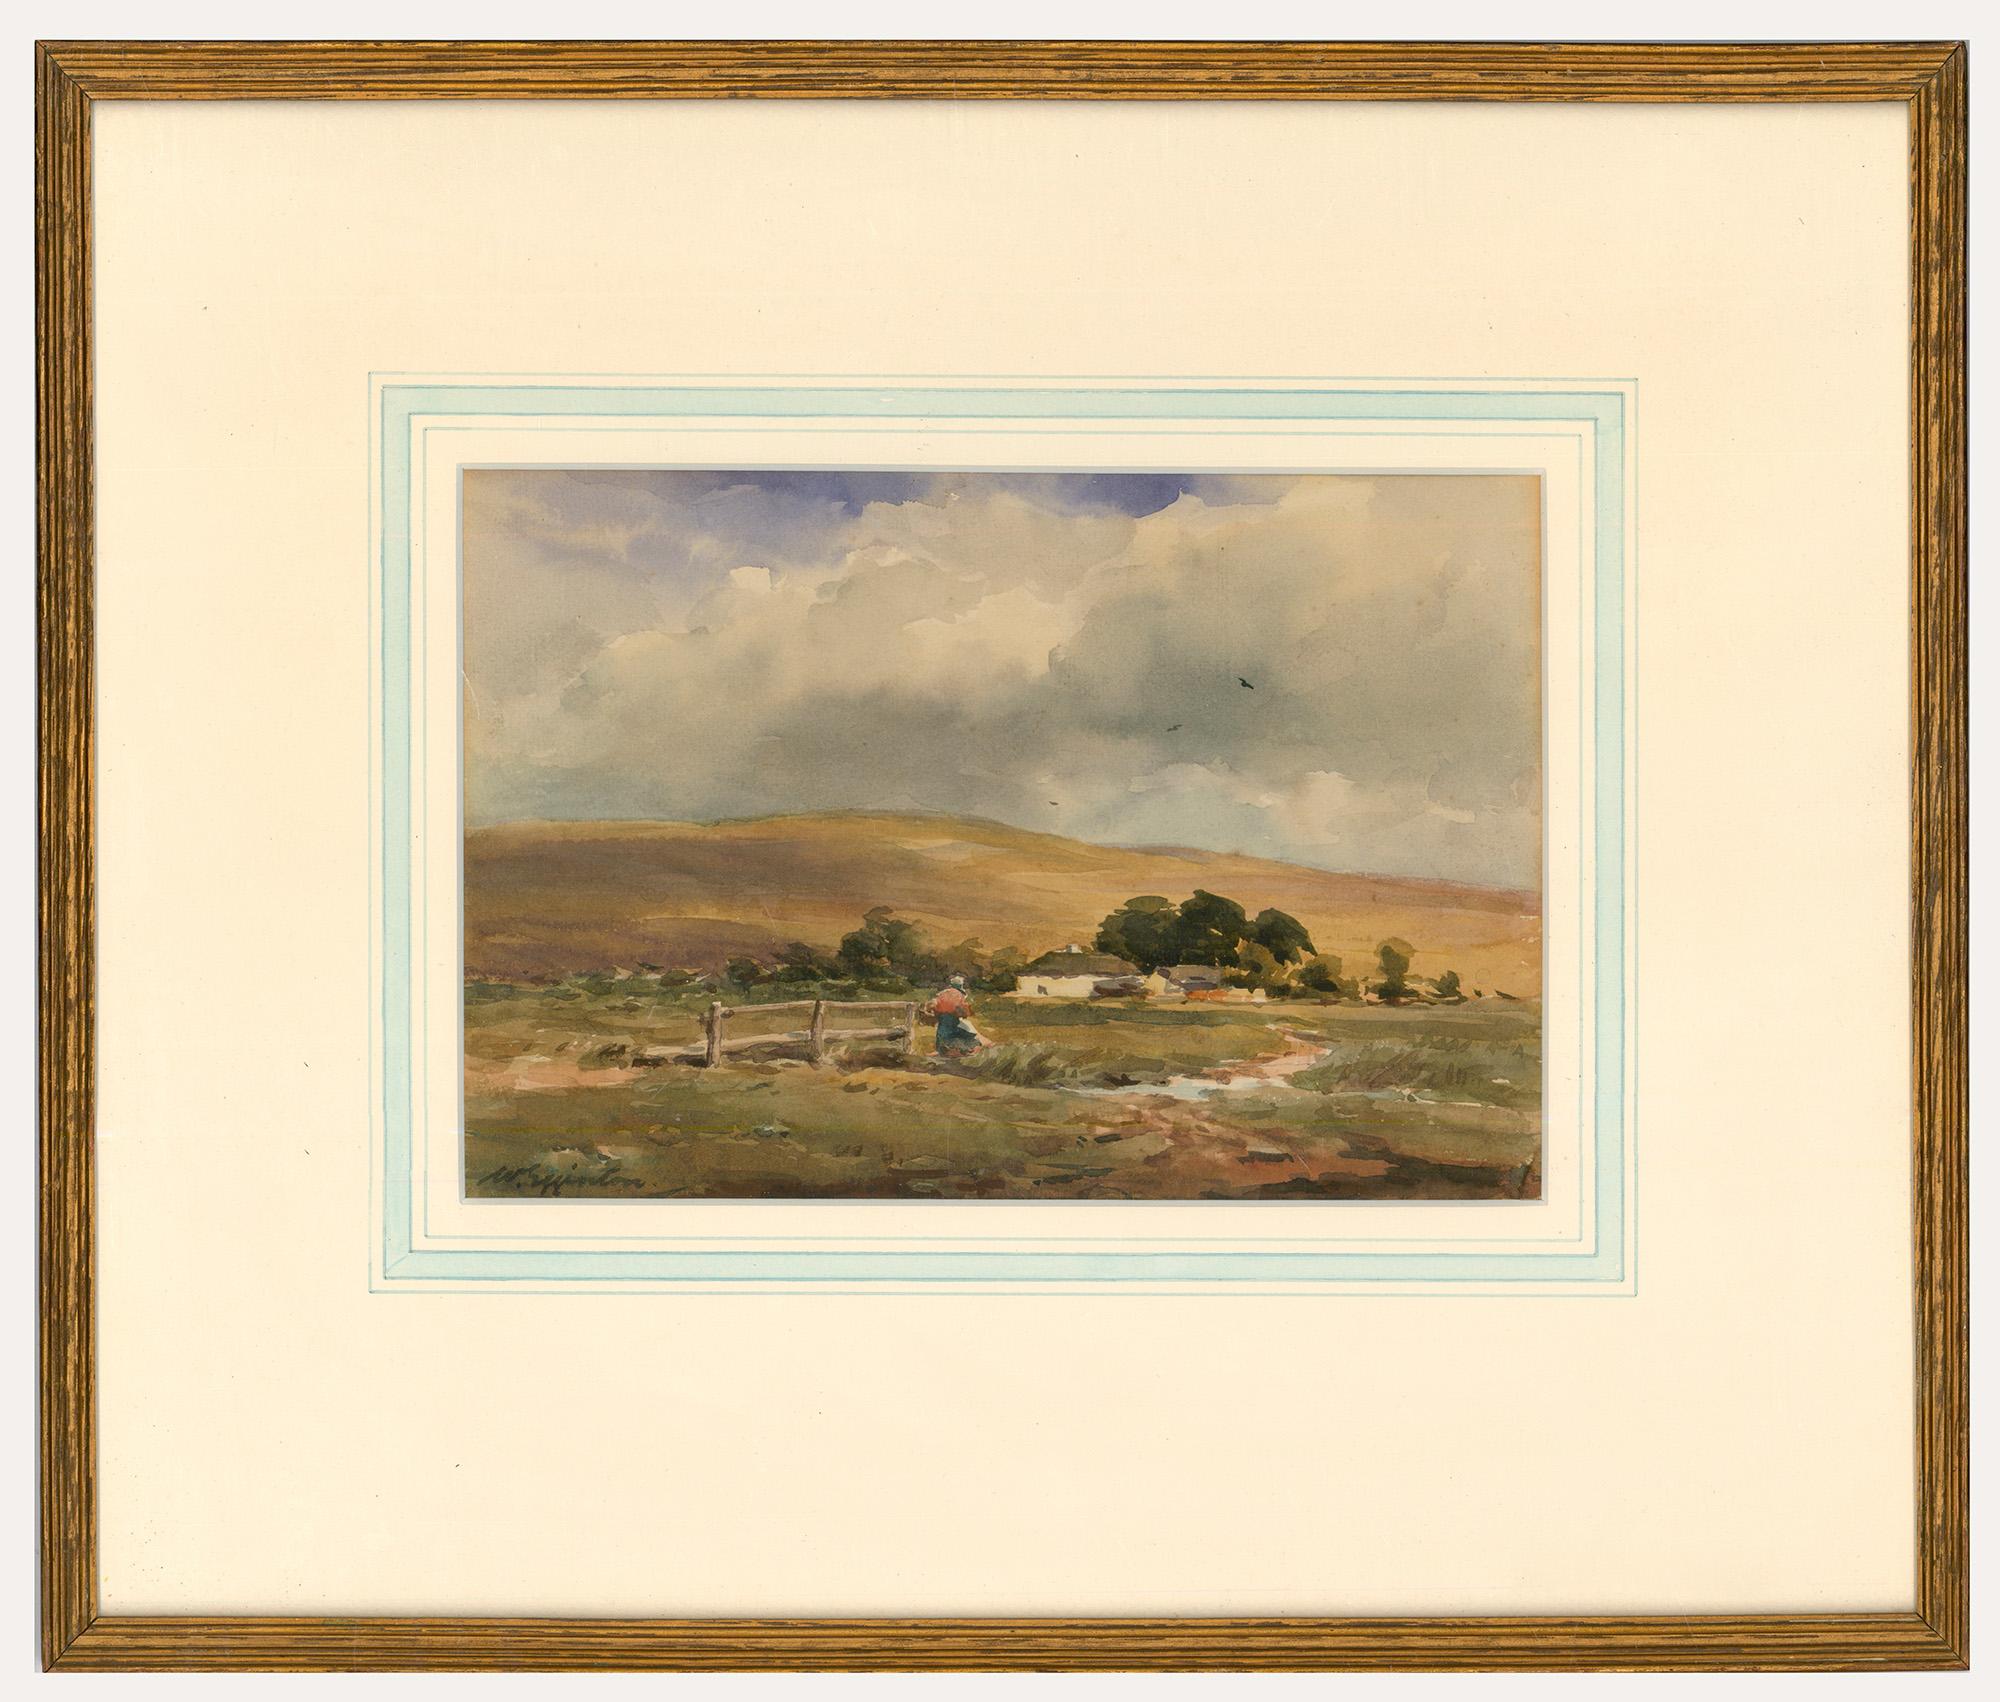 Unknown Landscape Art - Wycliffe Egginton (1875-1951) - Framed Watercolour, Crossing the Common